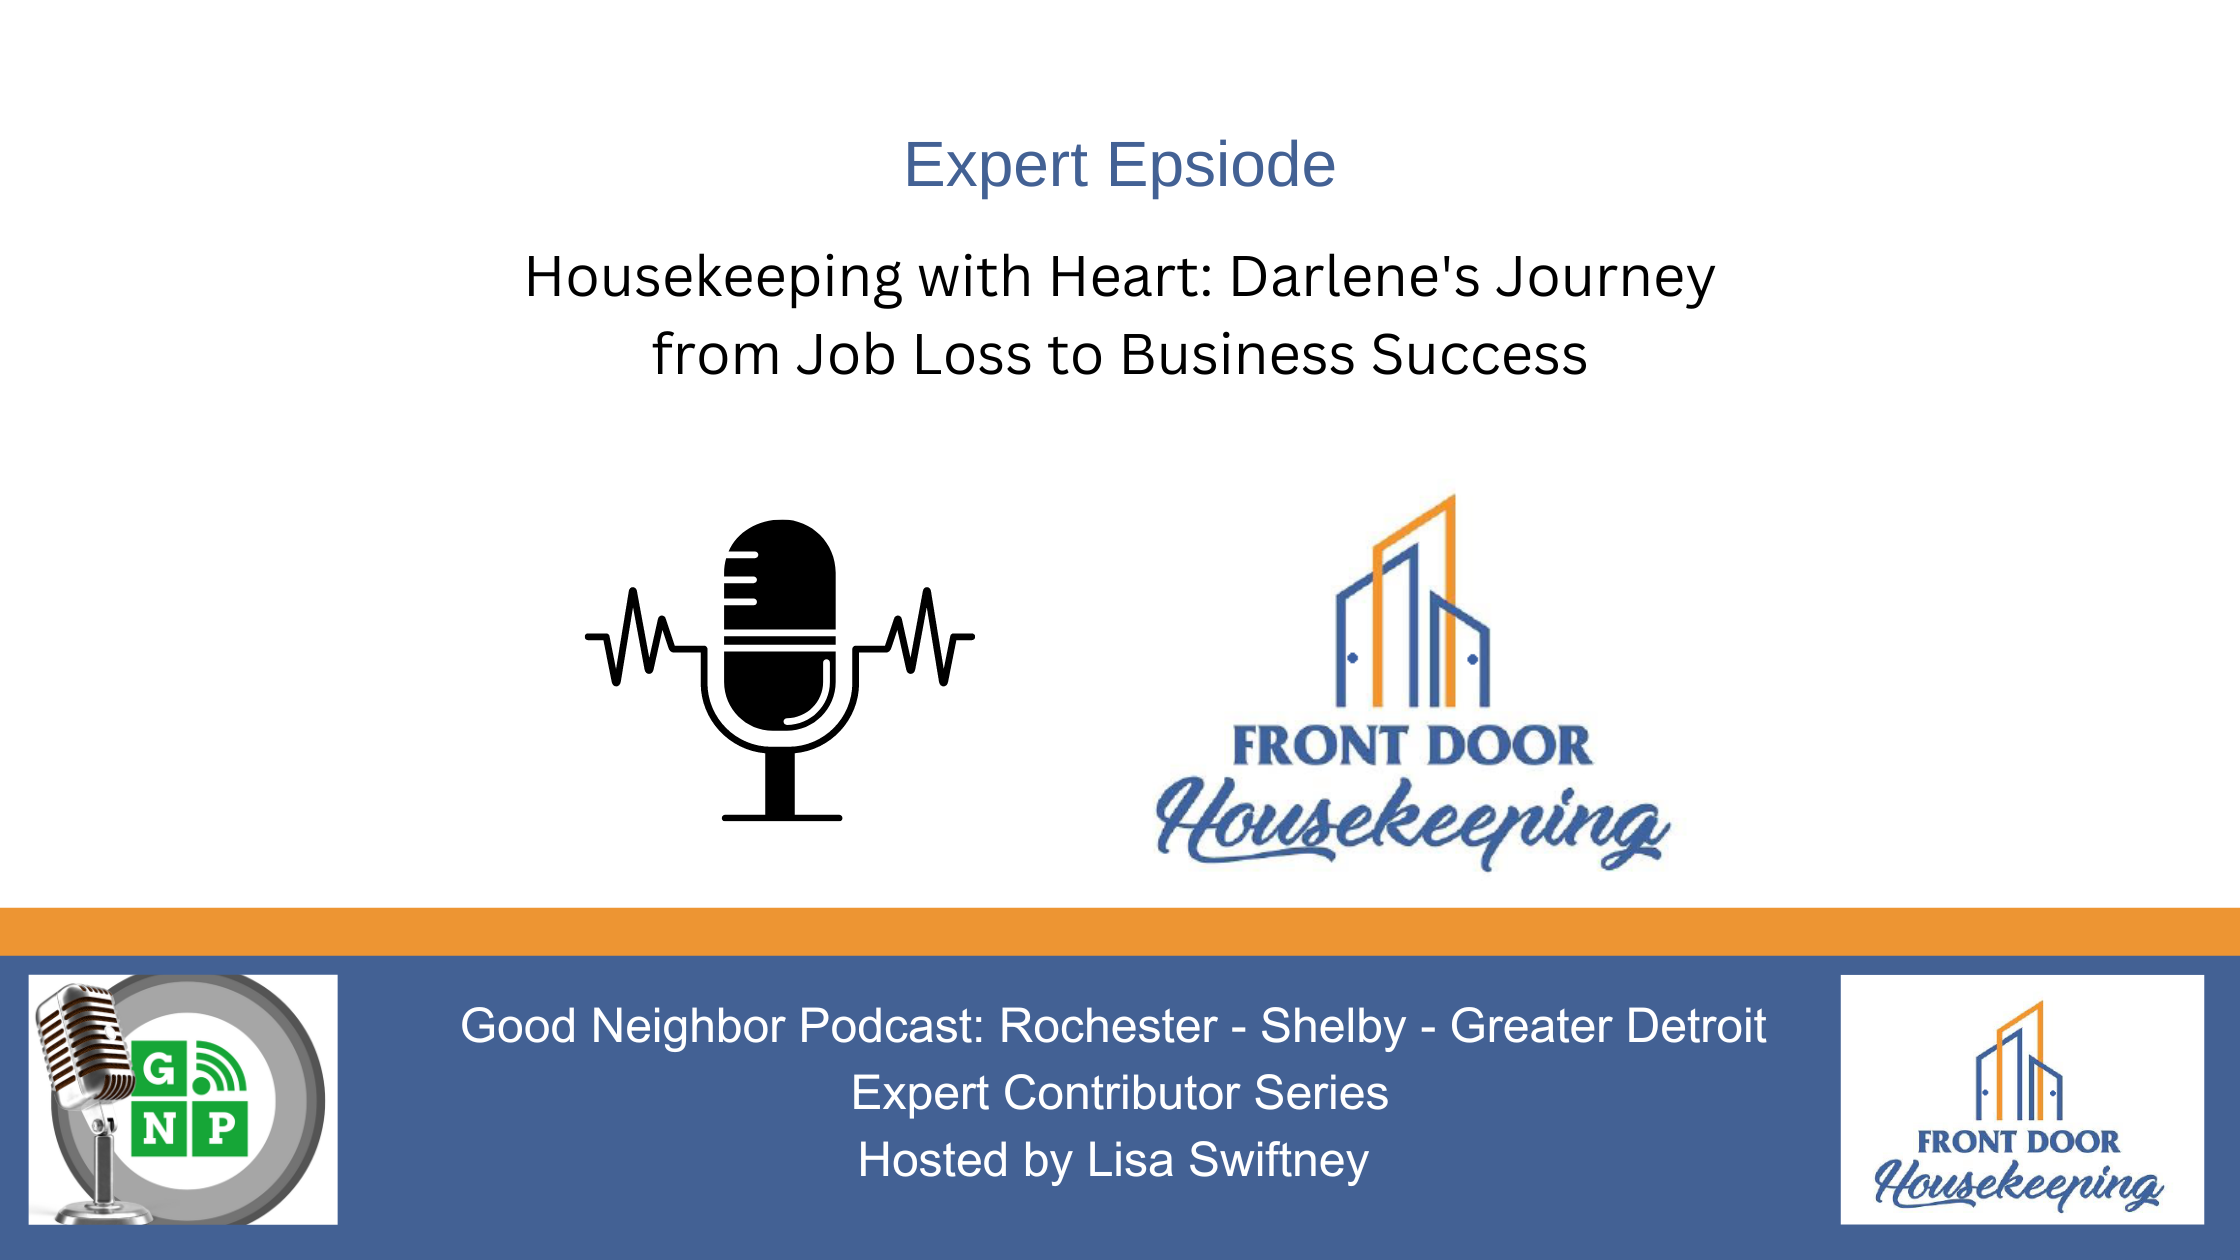 Expert Episode: Housekeeping with Heart: Darlene's Journey from Job Loss to Business Success